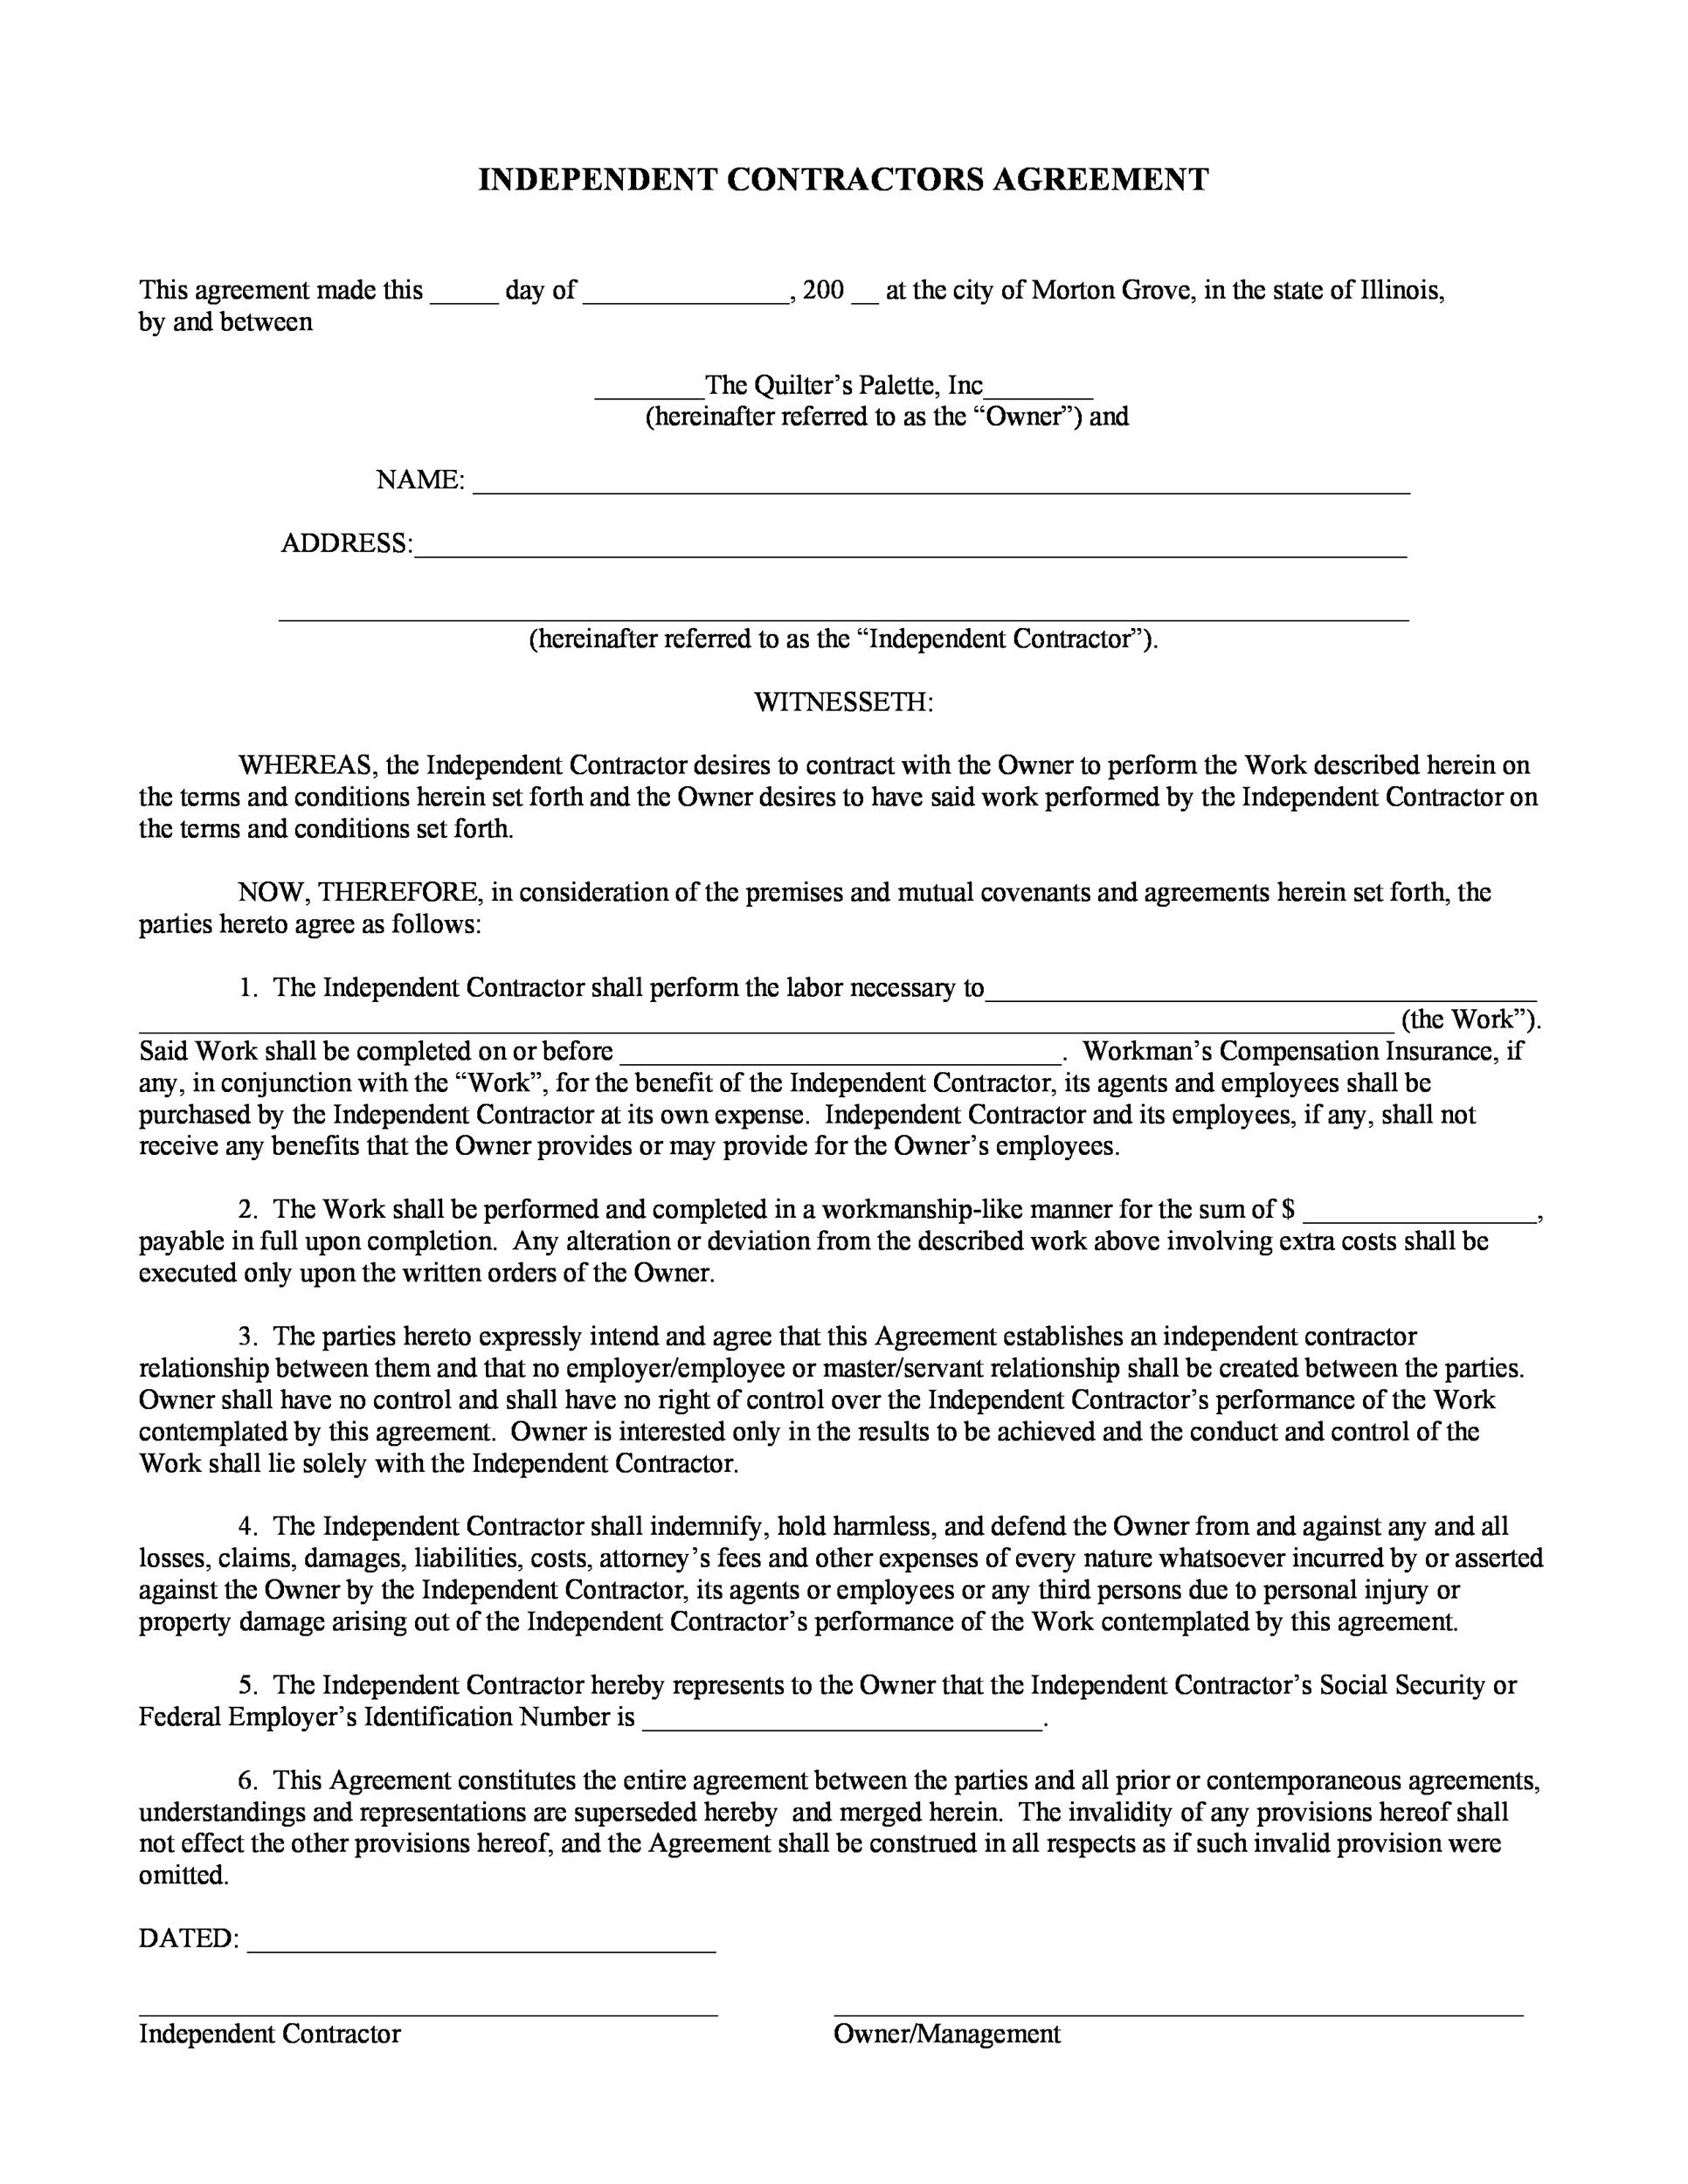 Free independent contractor agreement 37